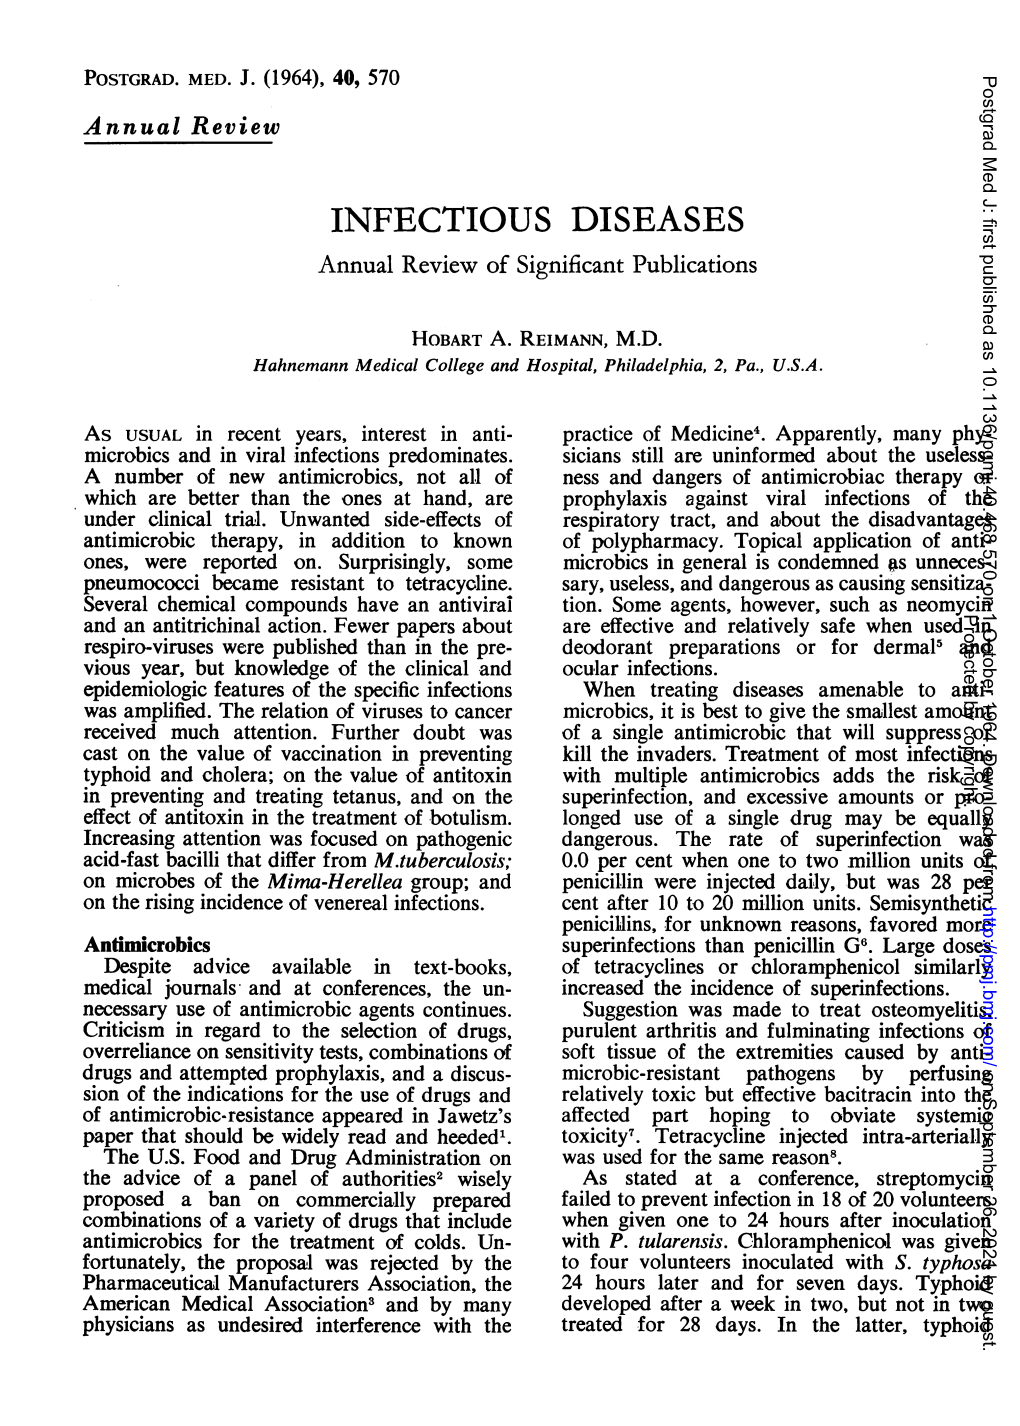 INFECTIOUS DISEASES Annual Review of Significant Publications